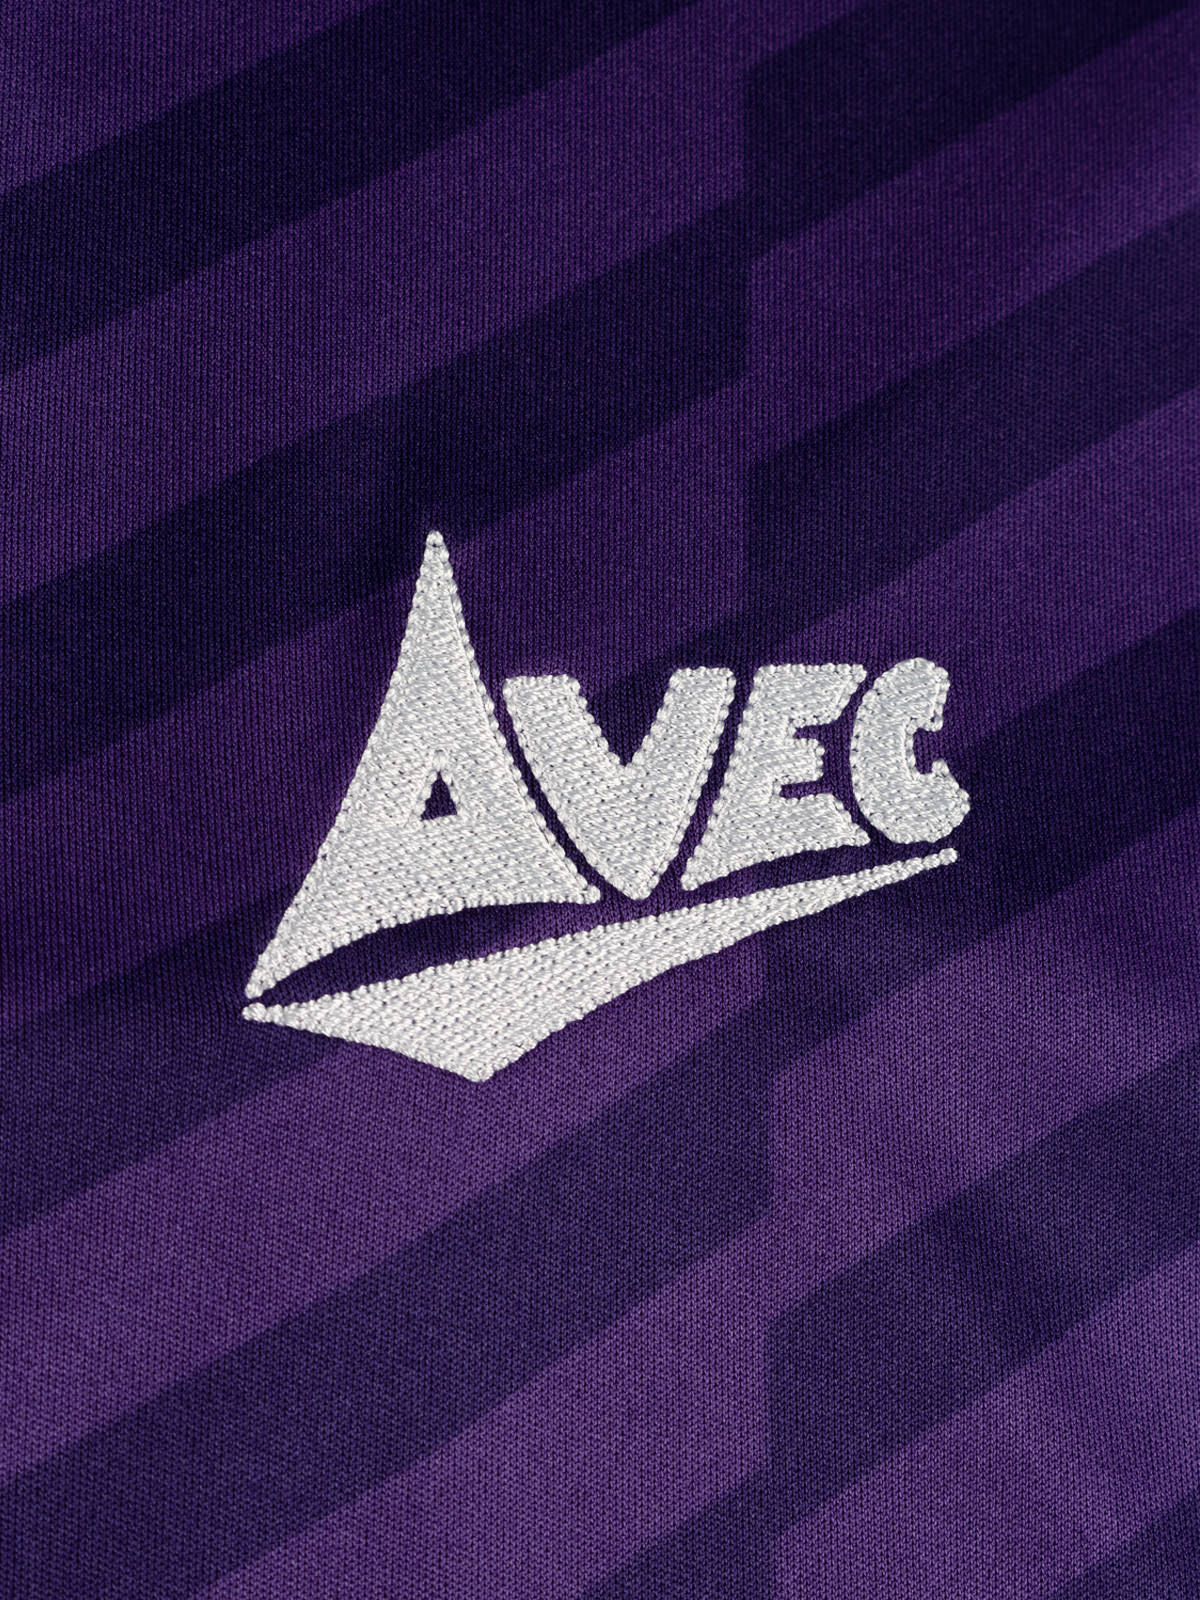 picture of evolve pro 3 jersey - purple